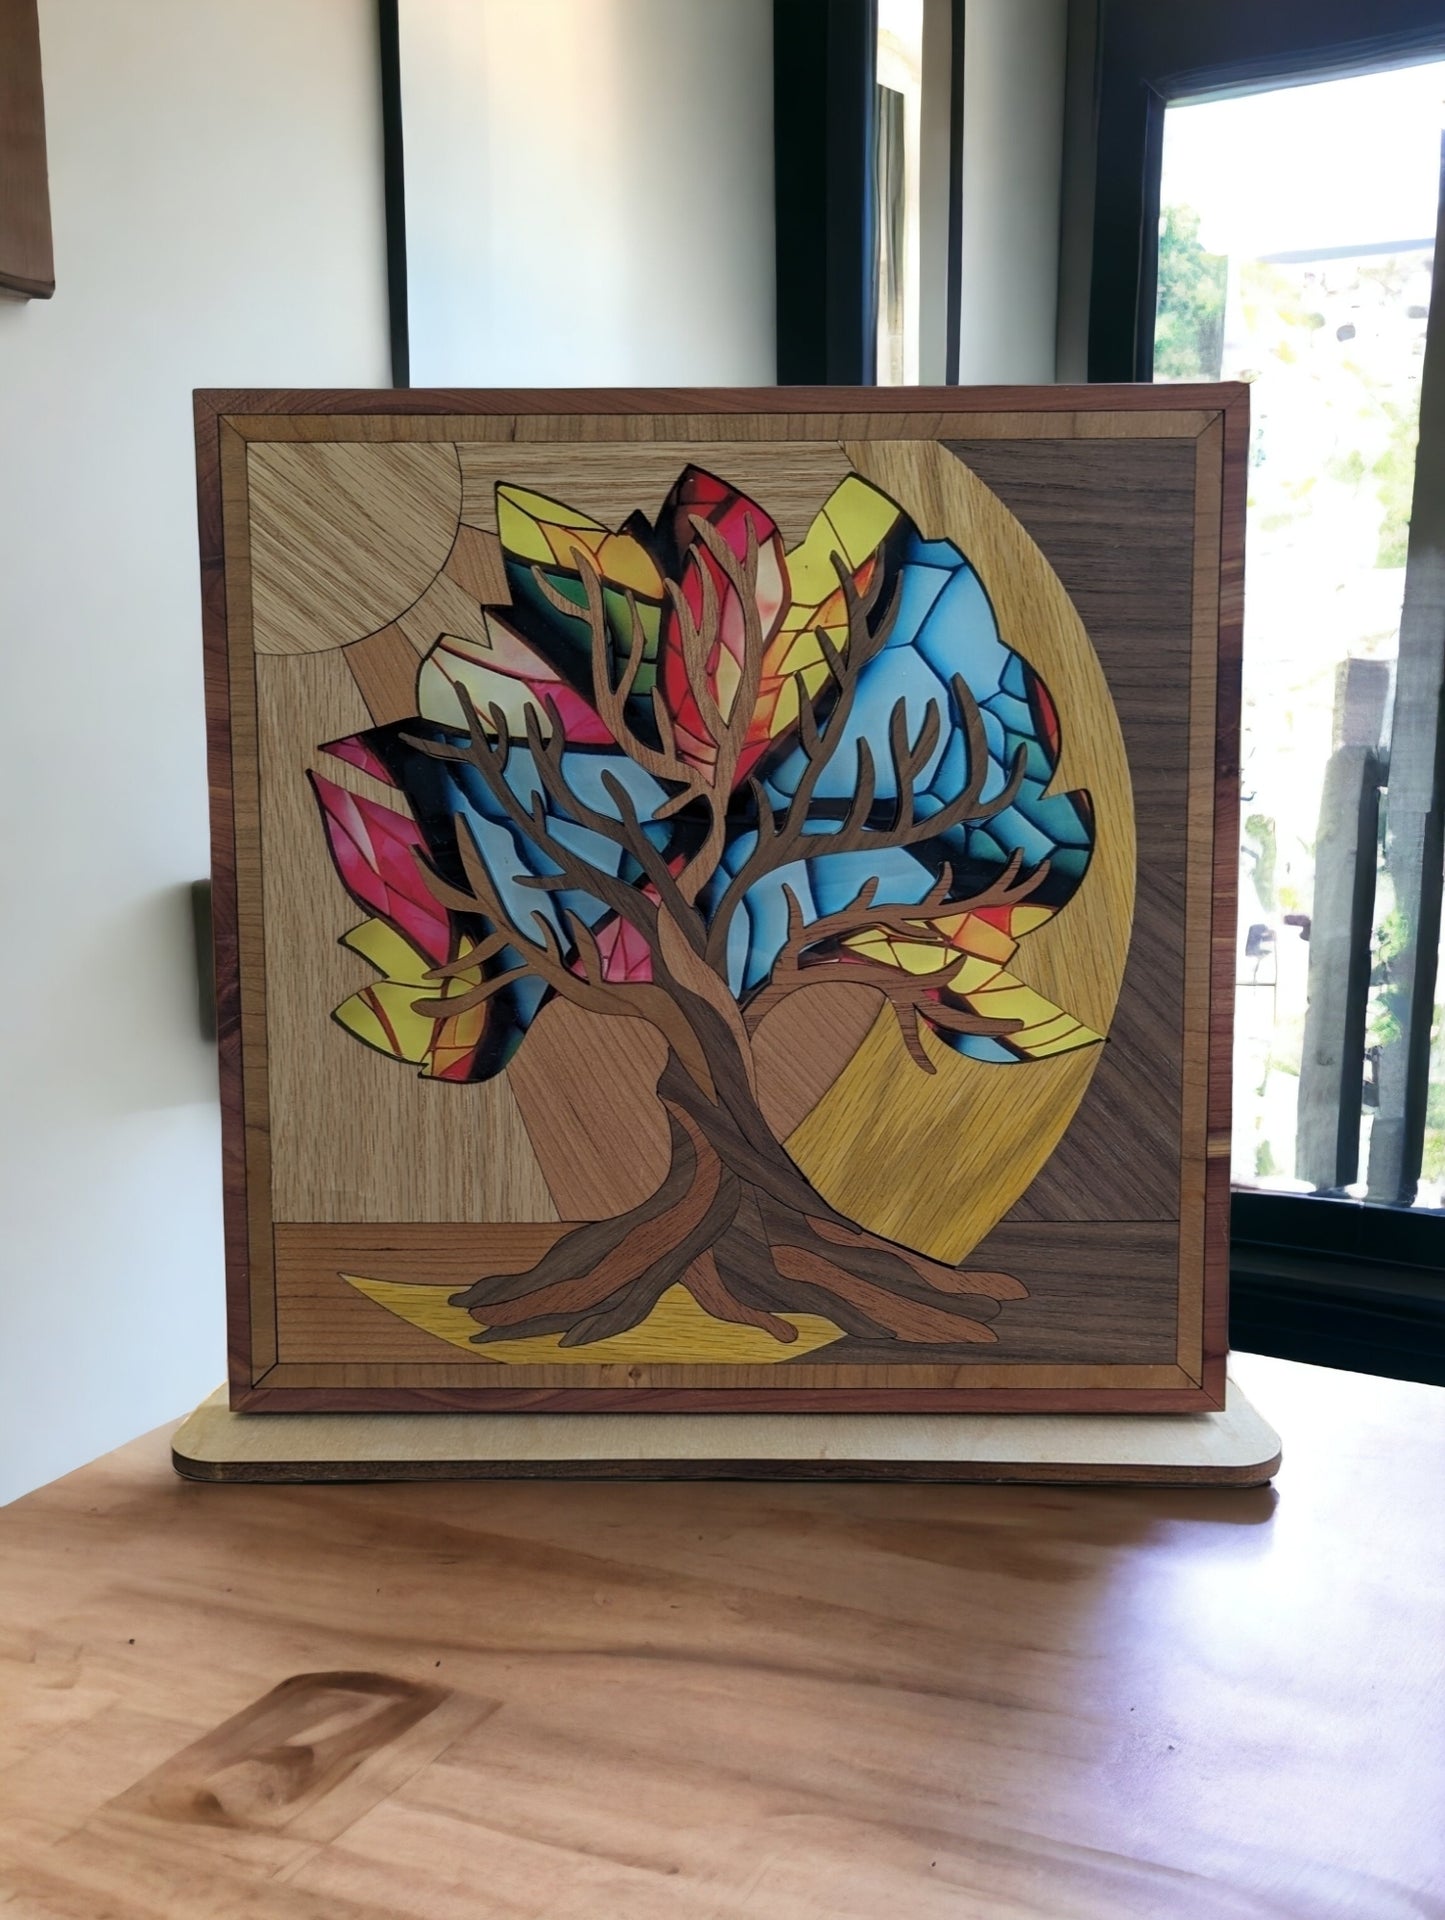 Tree of Life Shelf Sitter w/ Stained Glass Leaves